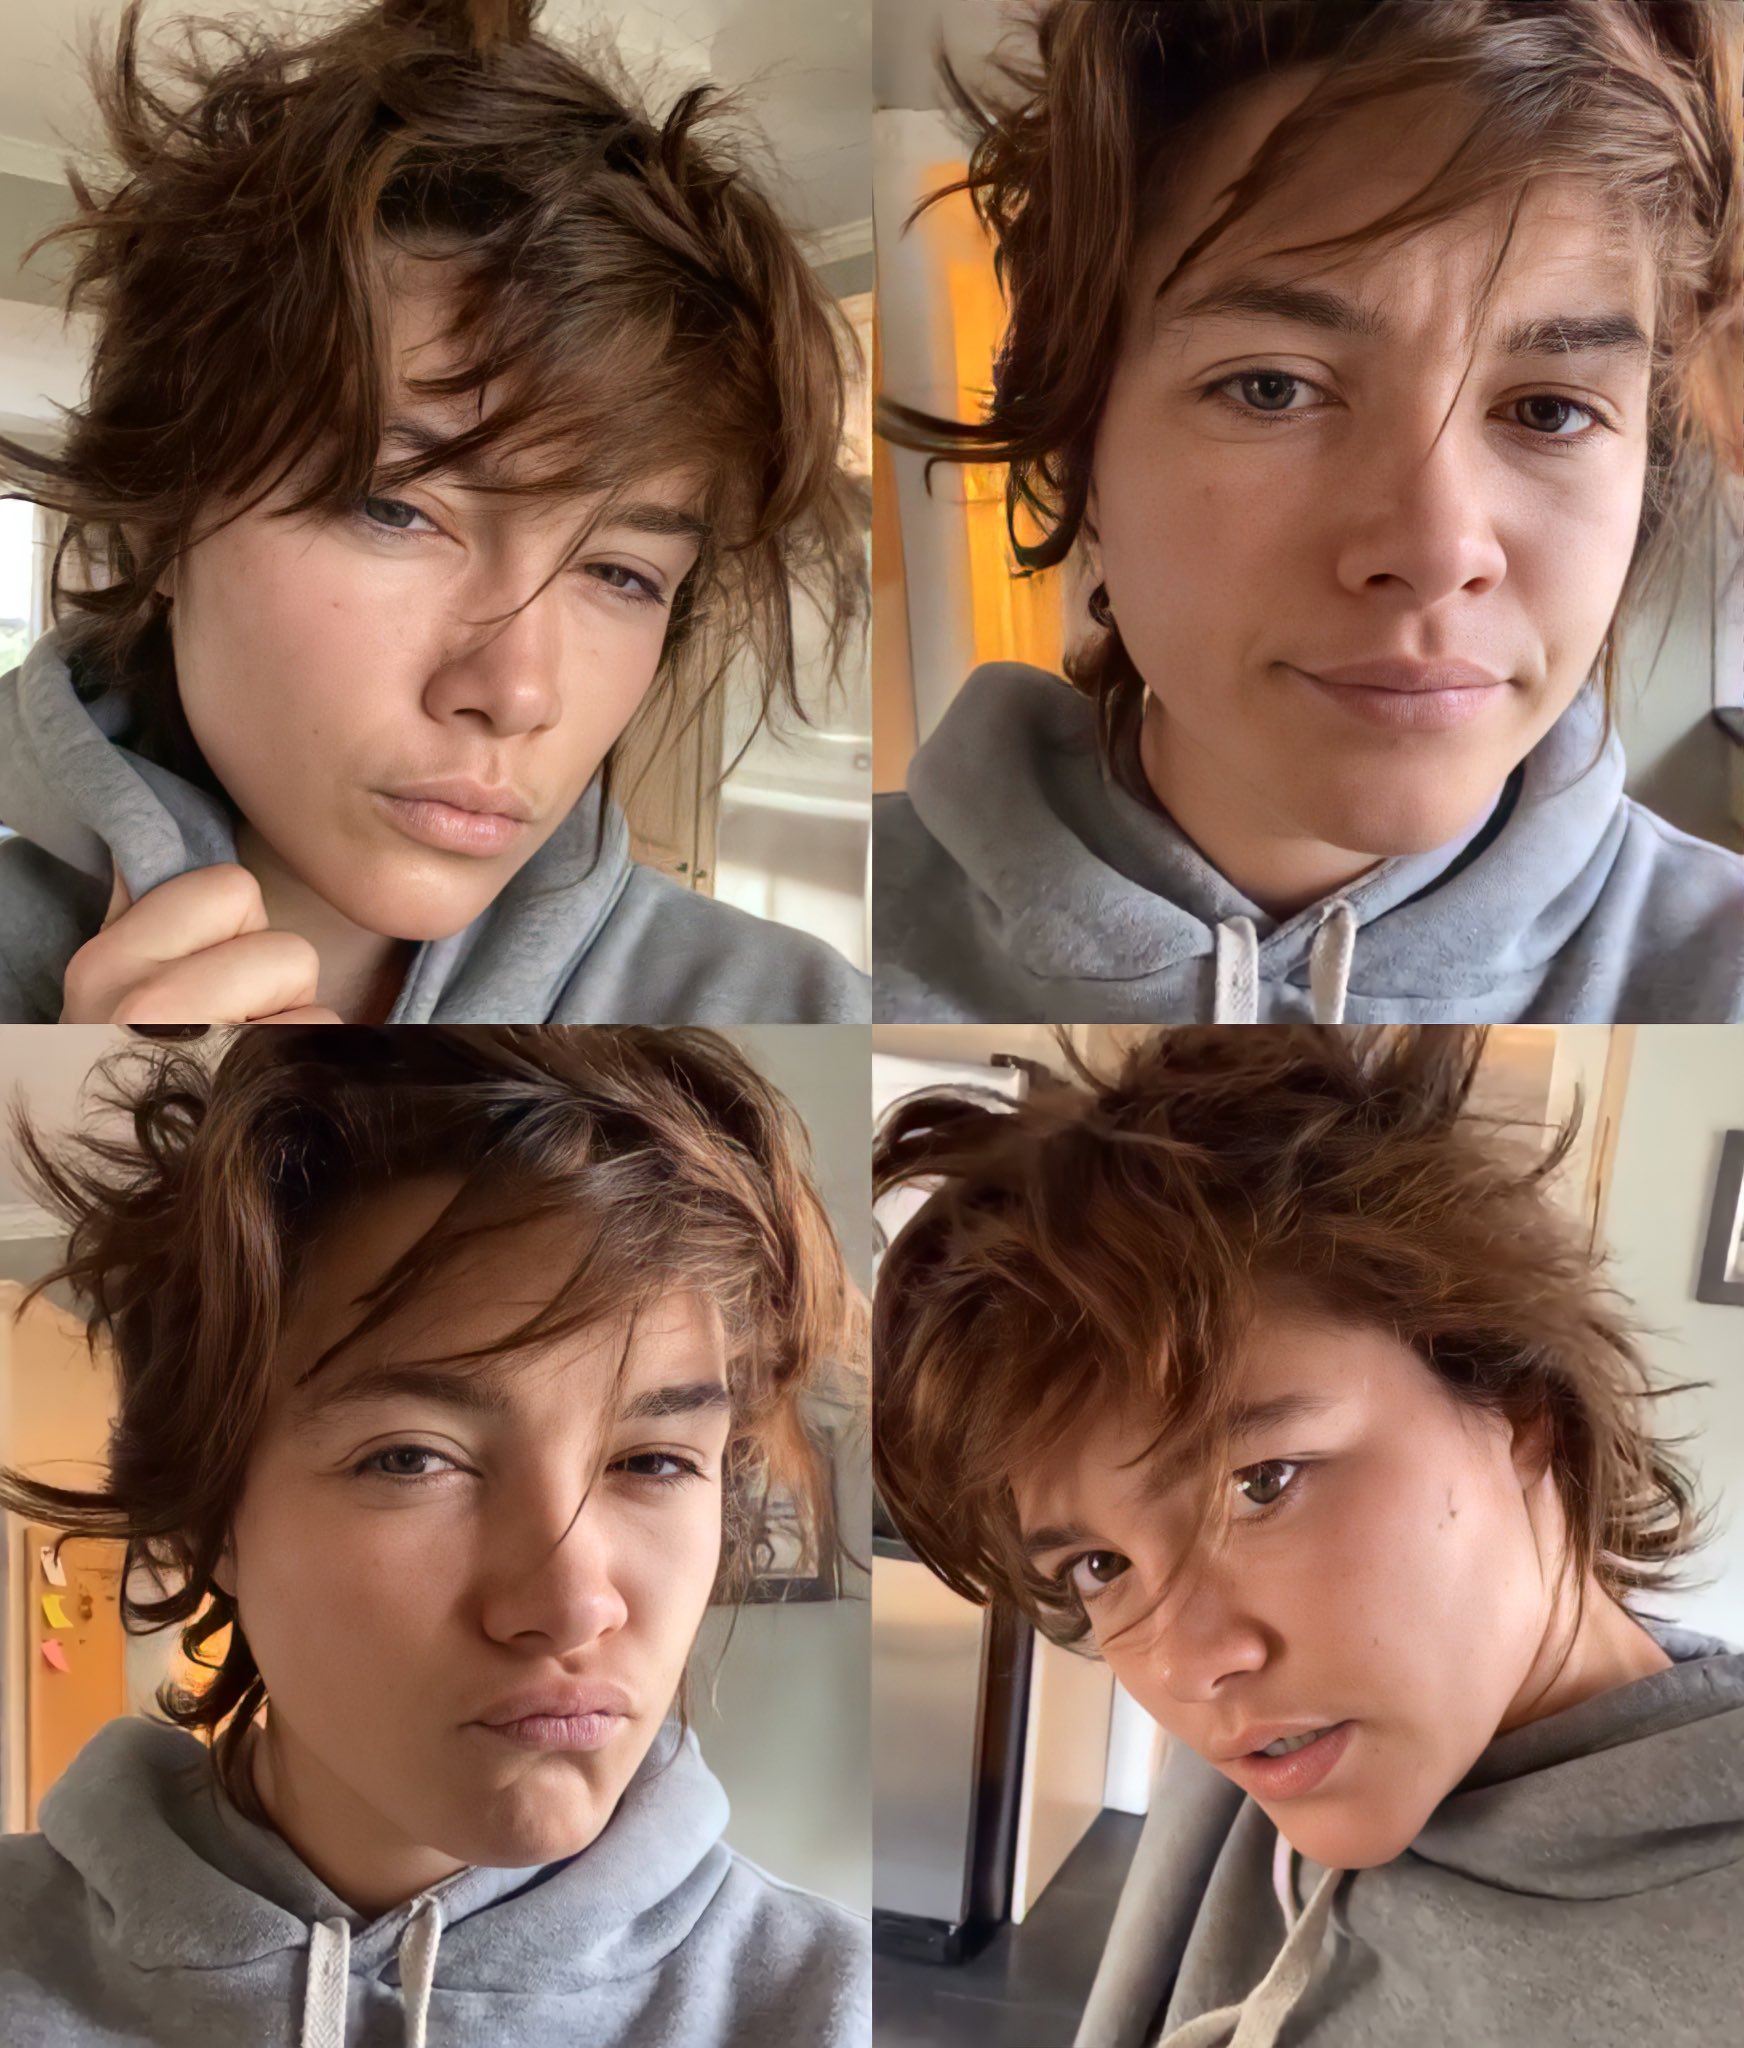 Florence Pugh Daily on Twitter: 